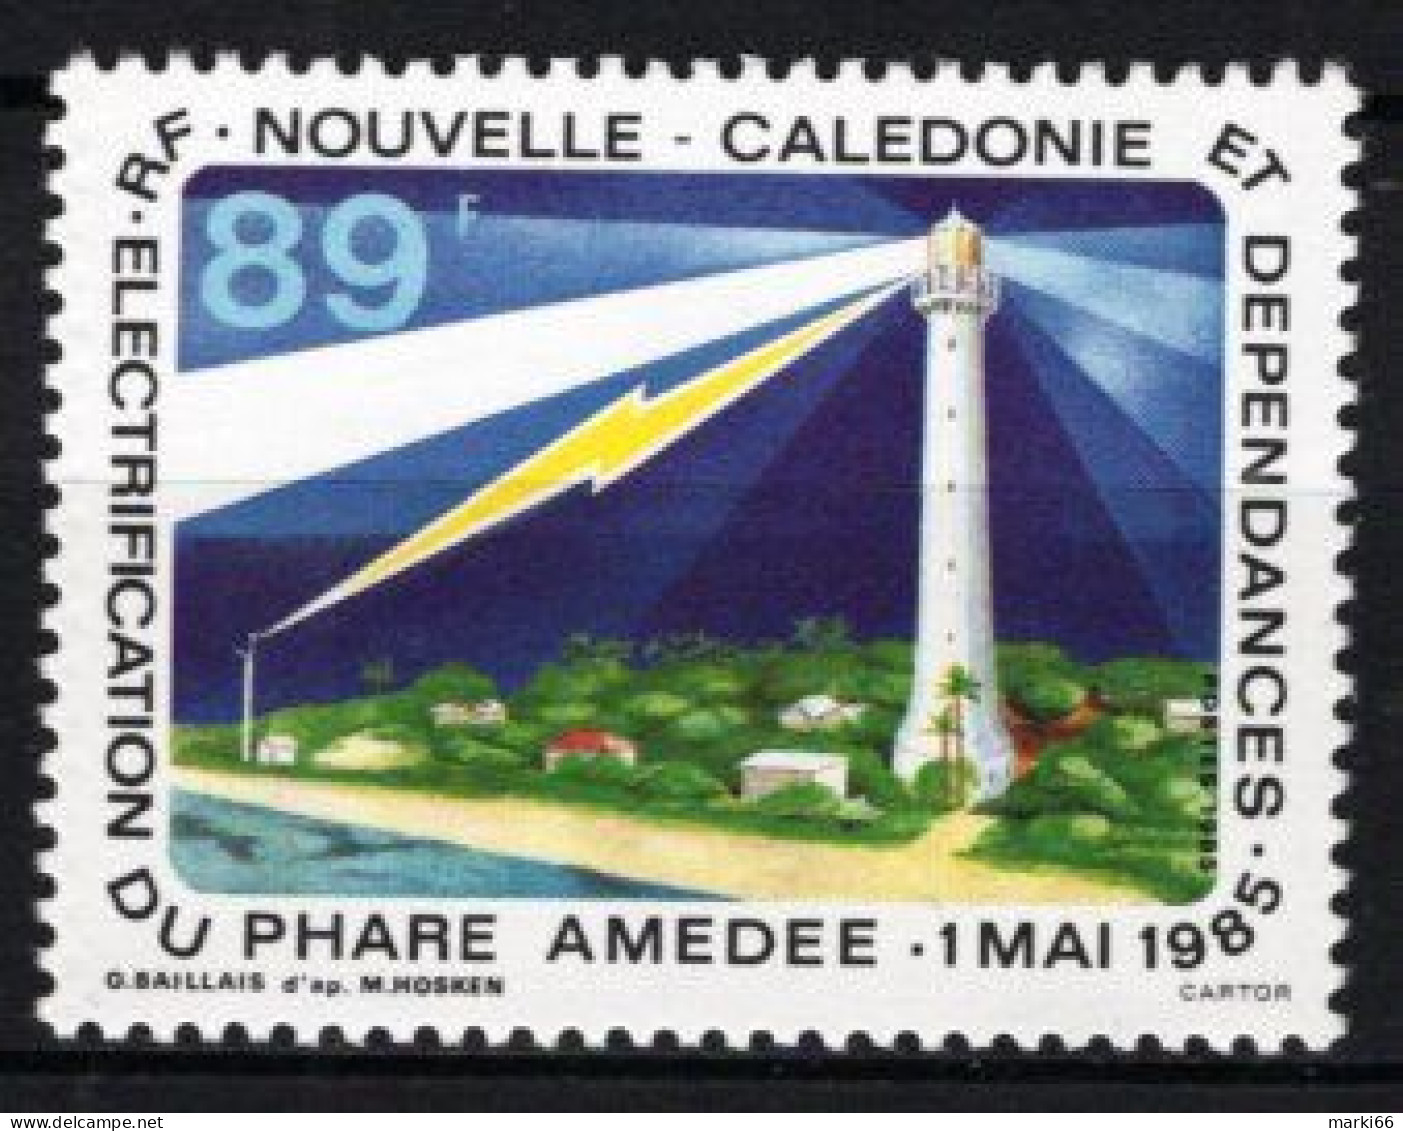 New Caledonia - 1985 - Electrification Amedee Lighthouse In 1985 - Mint Stamp - Neufs